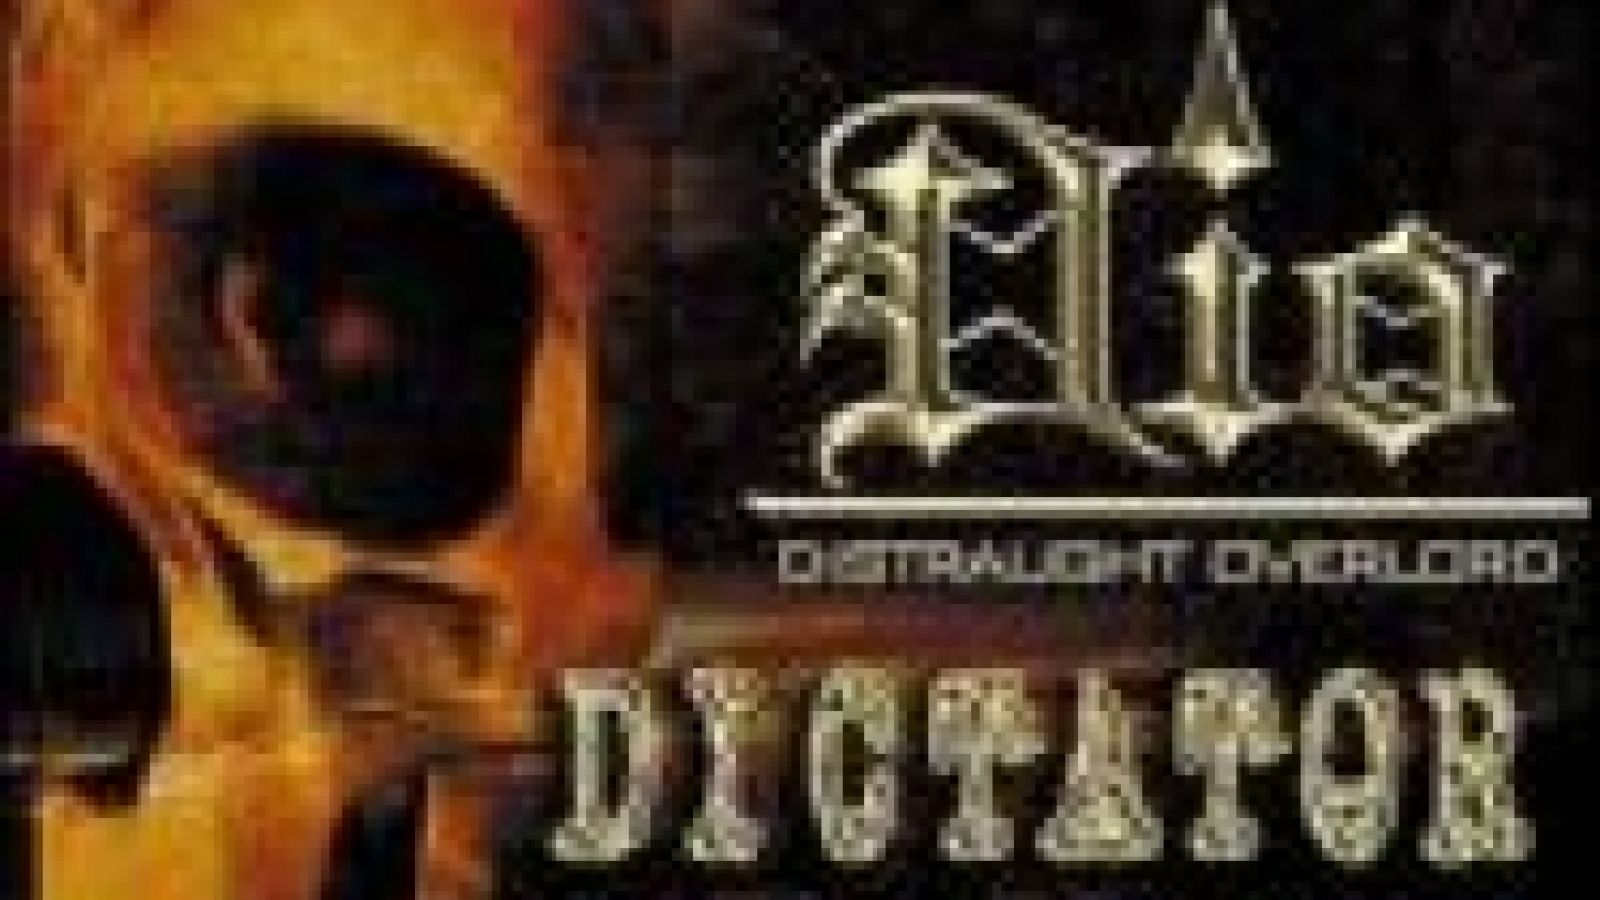 Dio - distraught overlord - DICTATOR © 